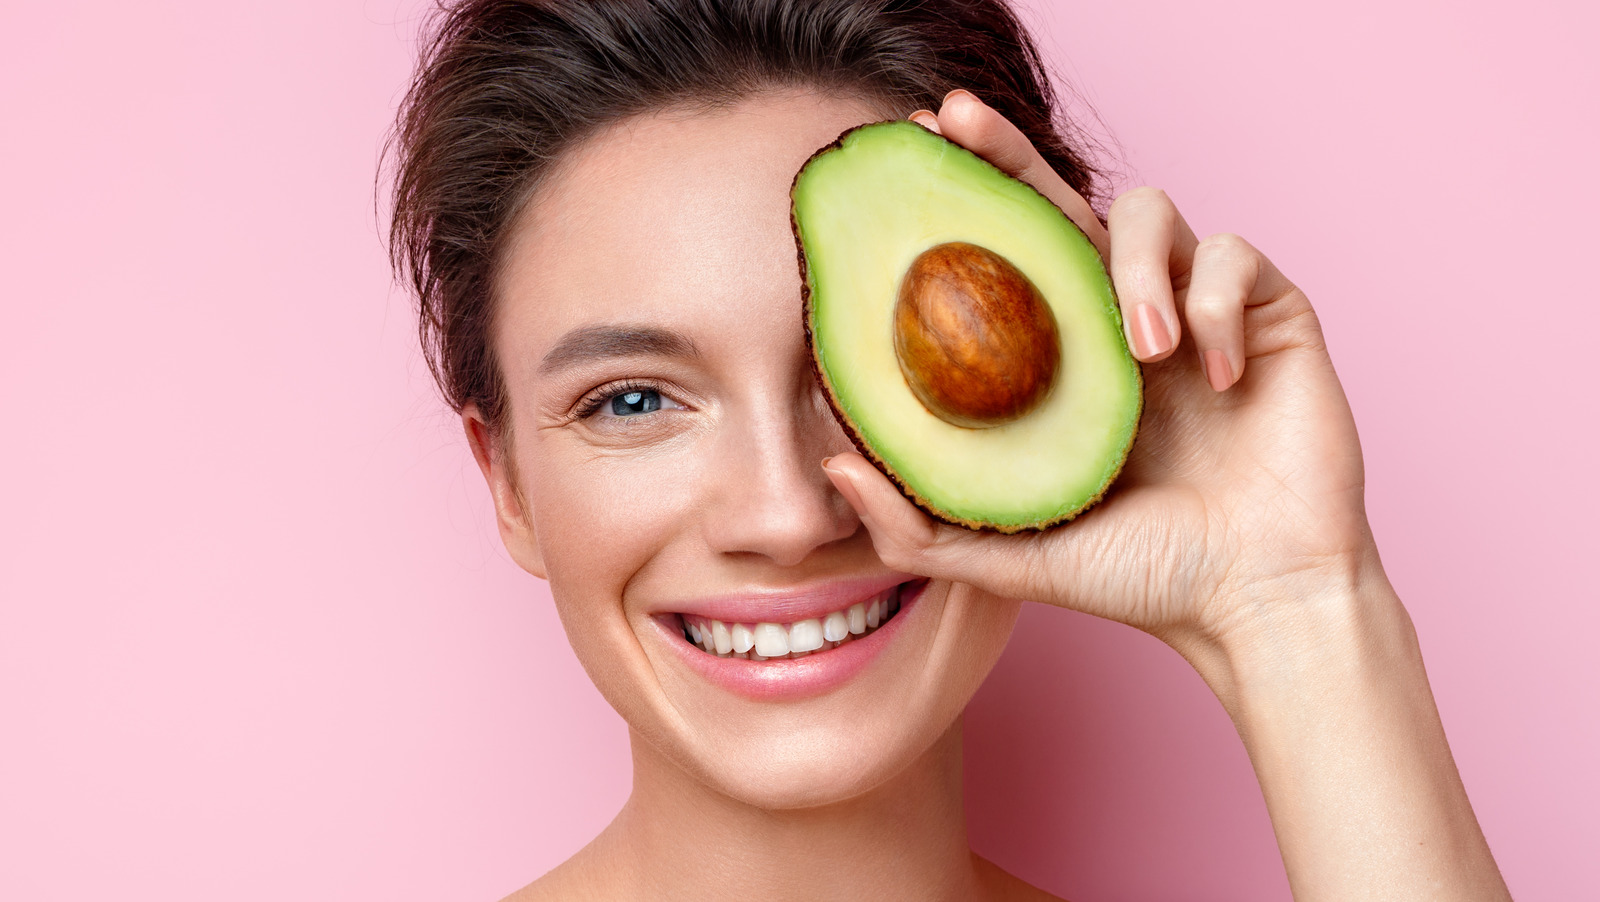 7 Foods To Eat And 7 To Avoid For Better Skin